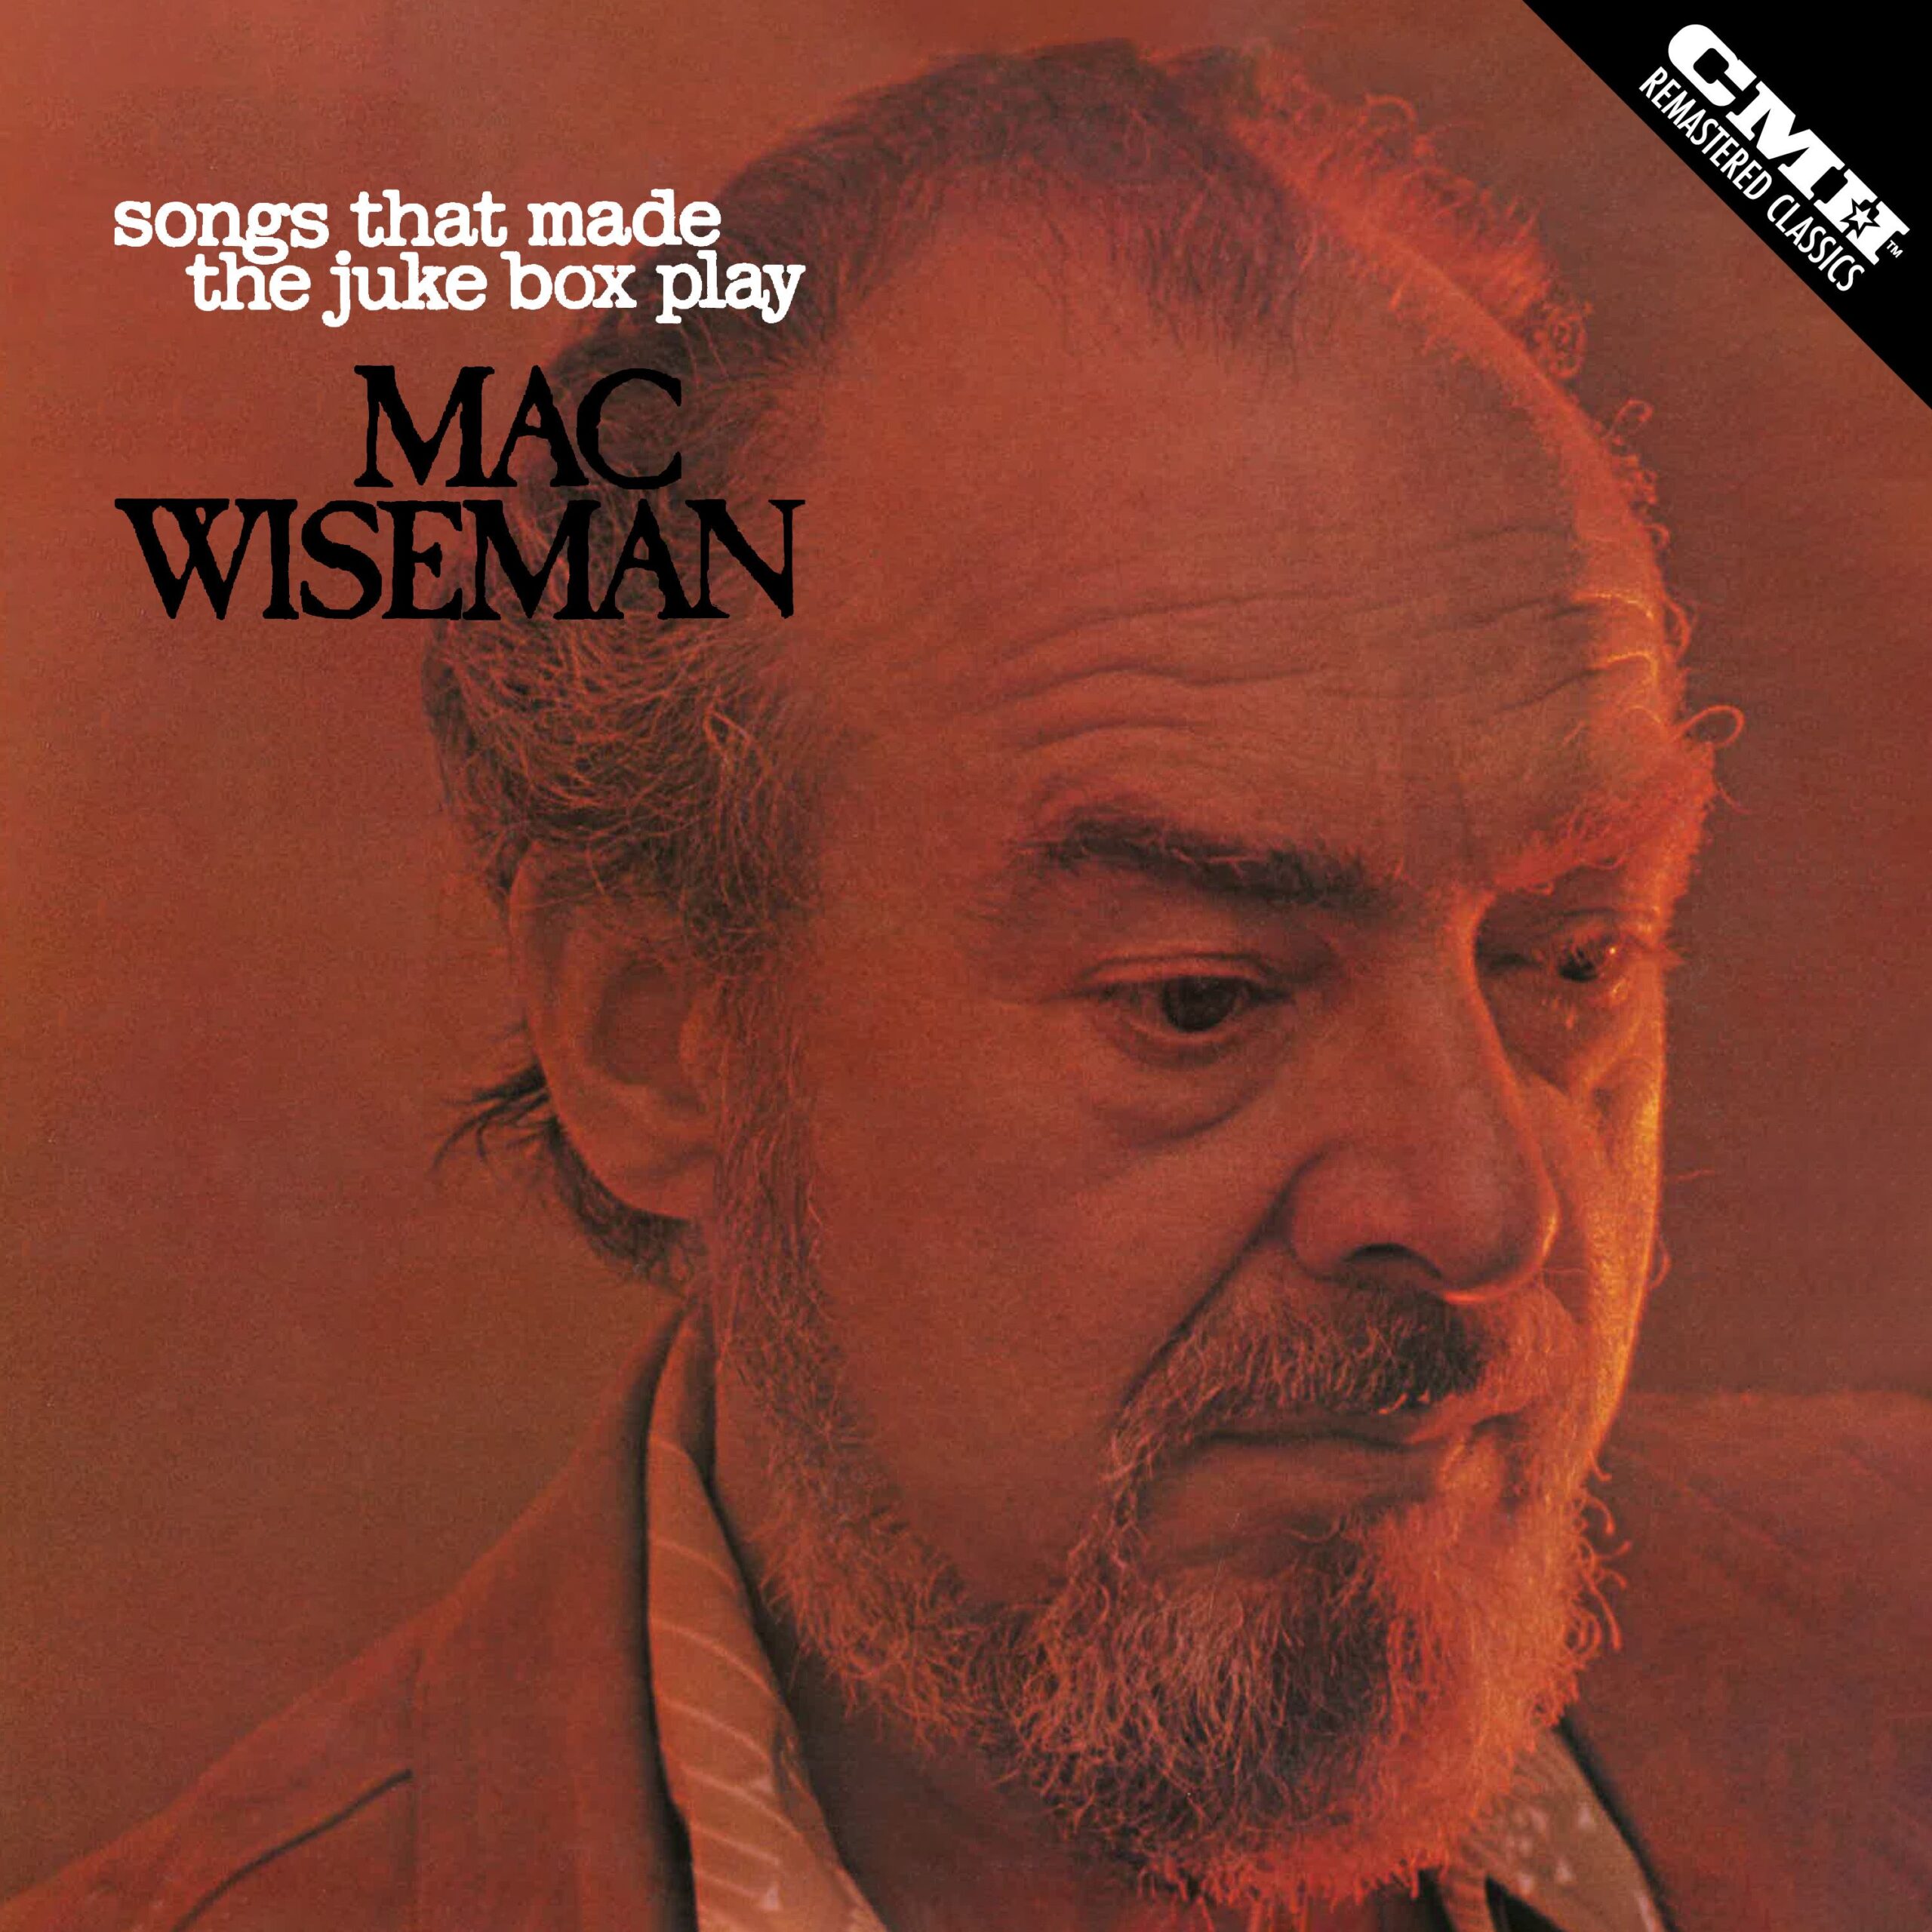 MAC WISEMAN’S 'SONGS THAT MADE THE JUKE BOX PLAY' NOW AVAILABLE ON DIGITAL & STREAMING